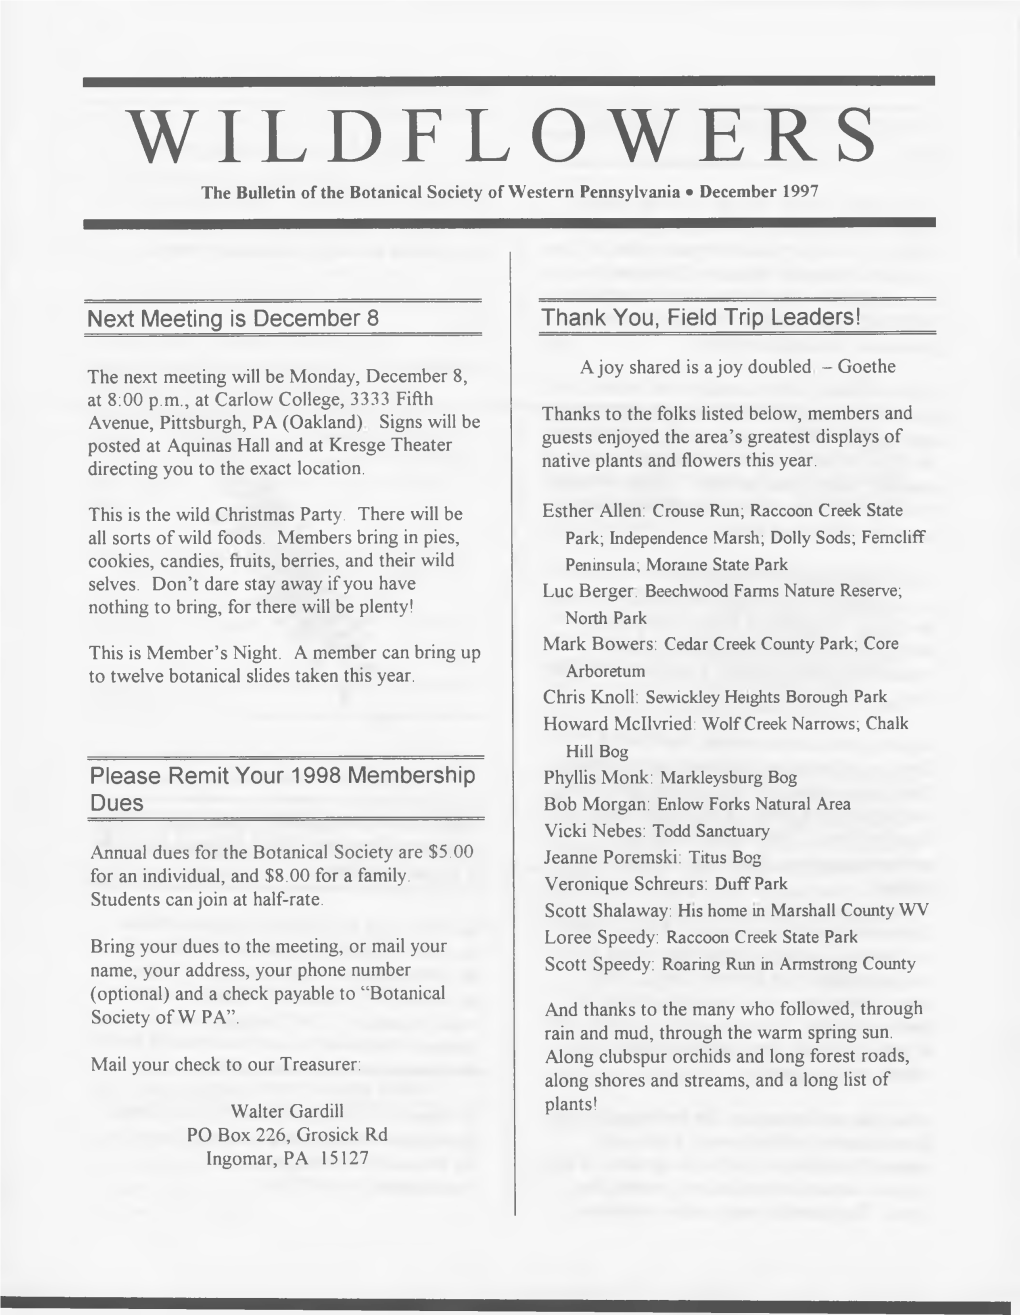 WILDFLOWERS the Bulletin of the Botanical Society of Western Pennsylvania • December 1997